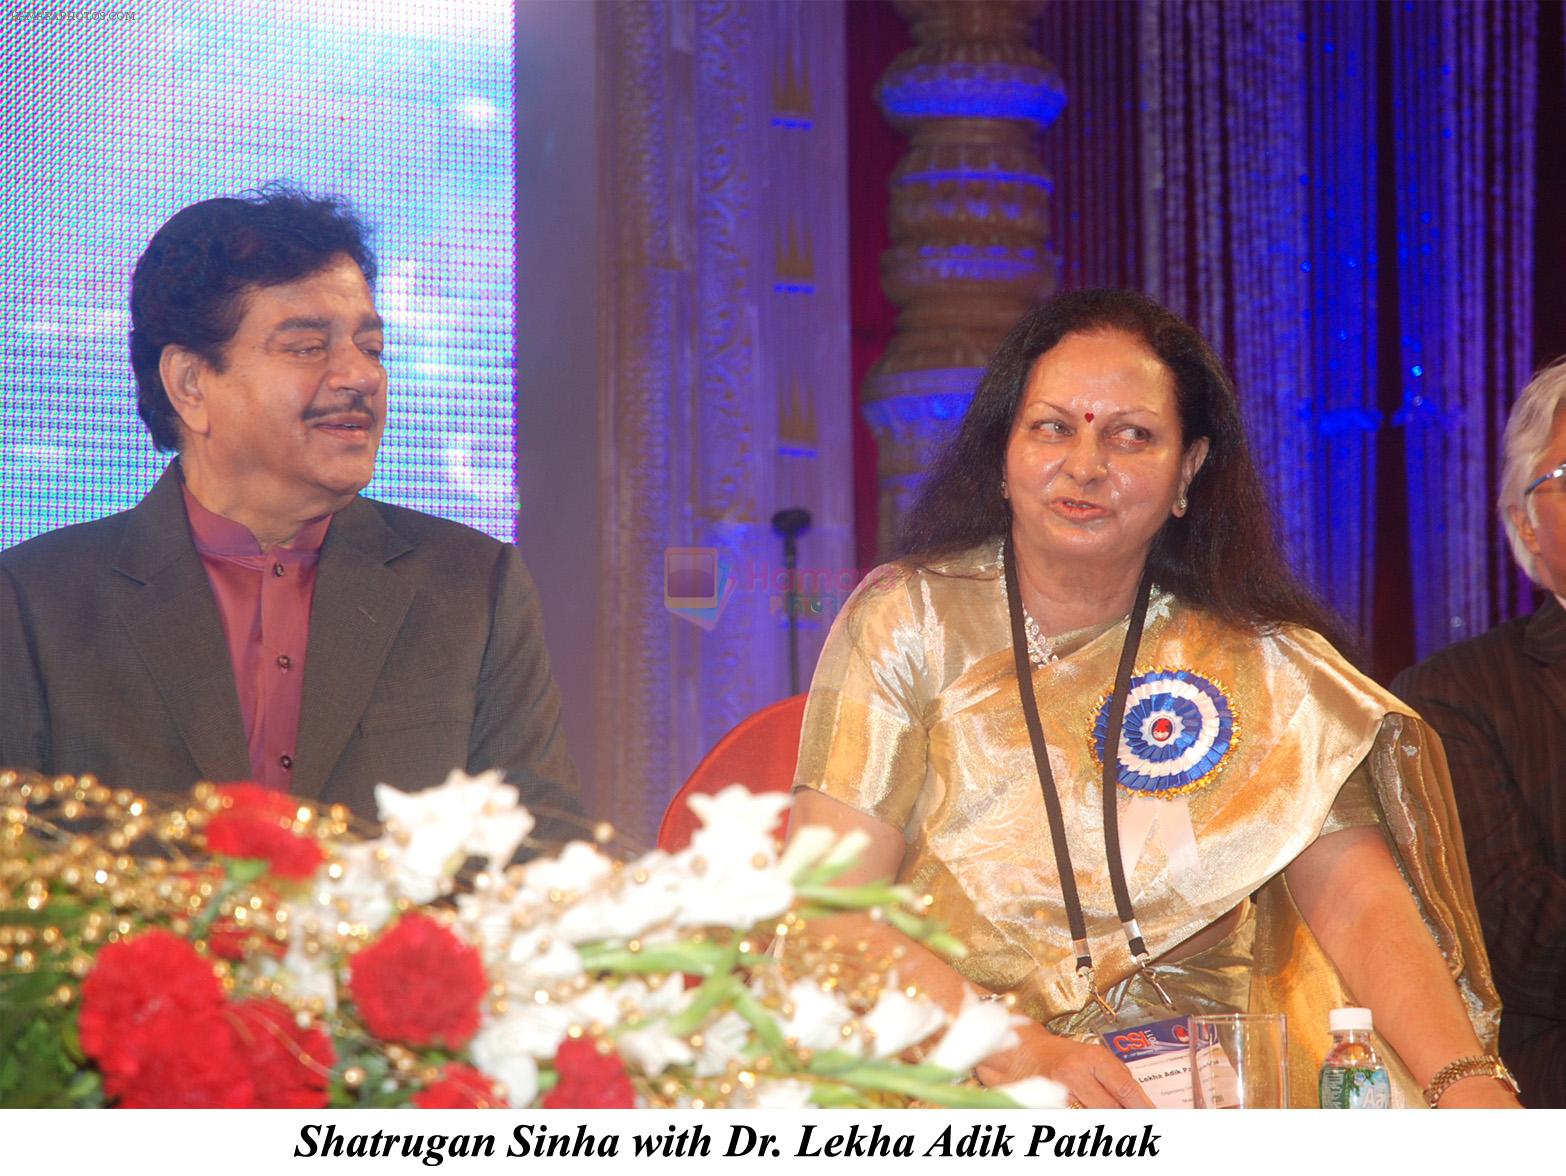 Shatrugan Sinha with Dr Lekha Adik Pathak at the 63rd Annual Conference of Cardiological Society of India in NCPA complex, Mumbai on 9th Dec 2011